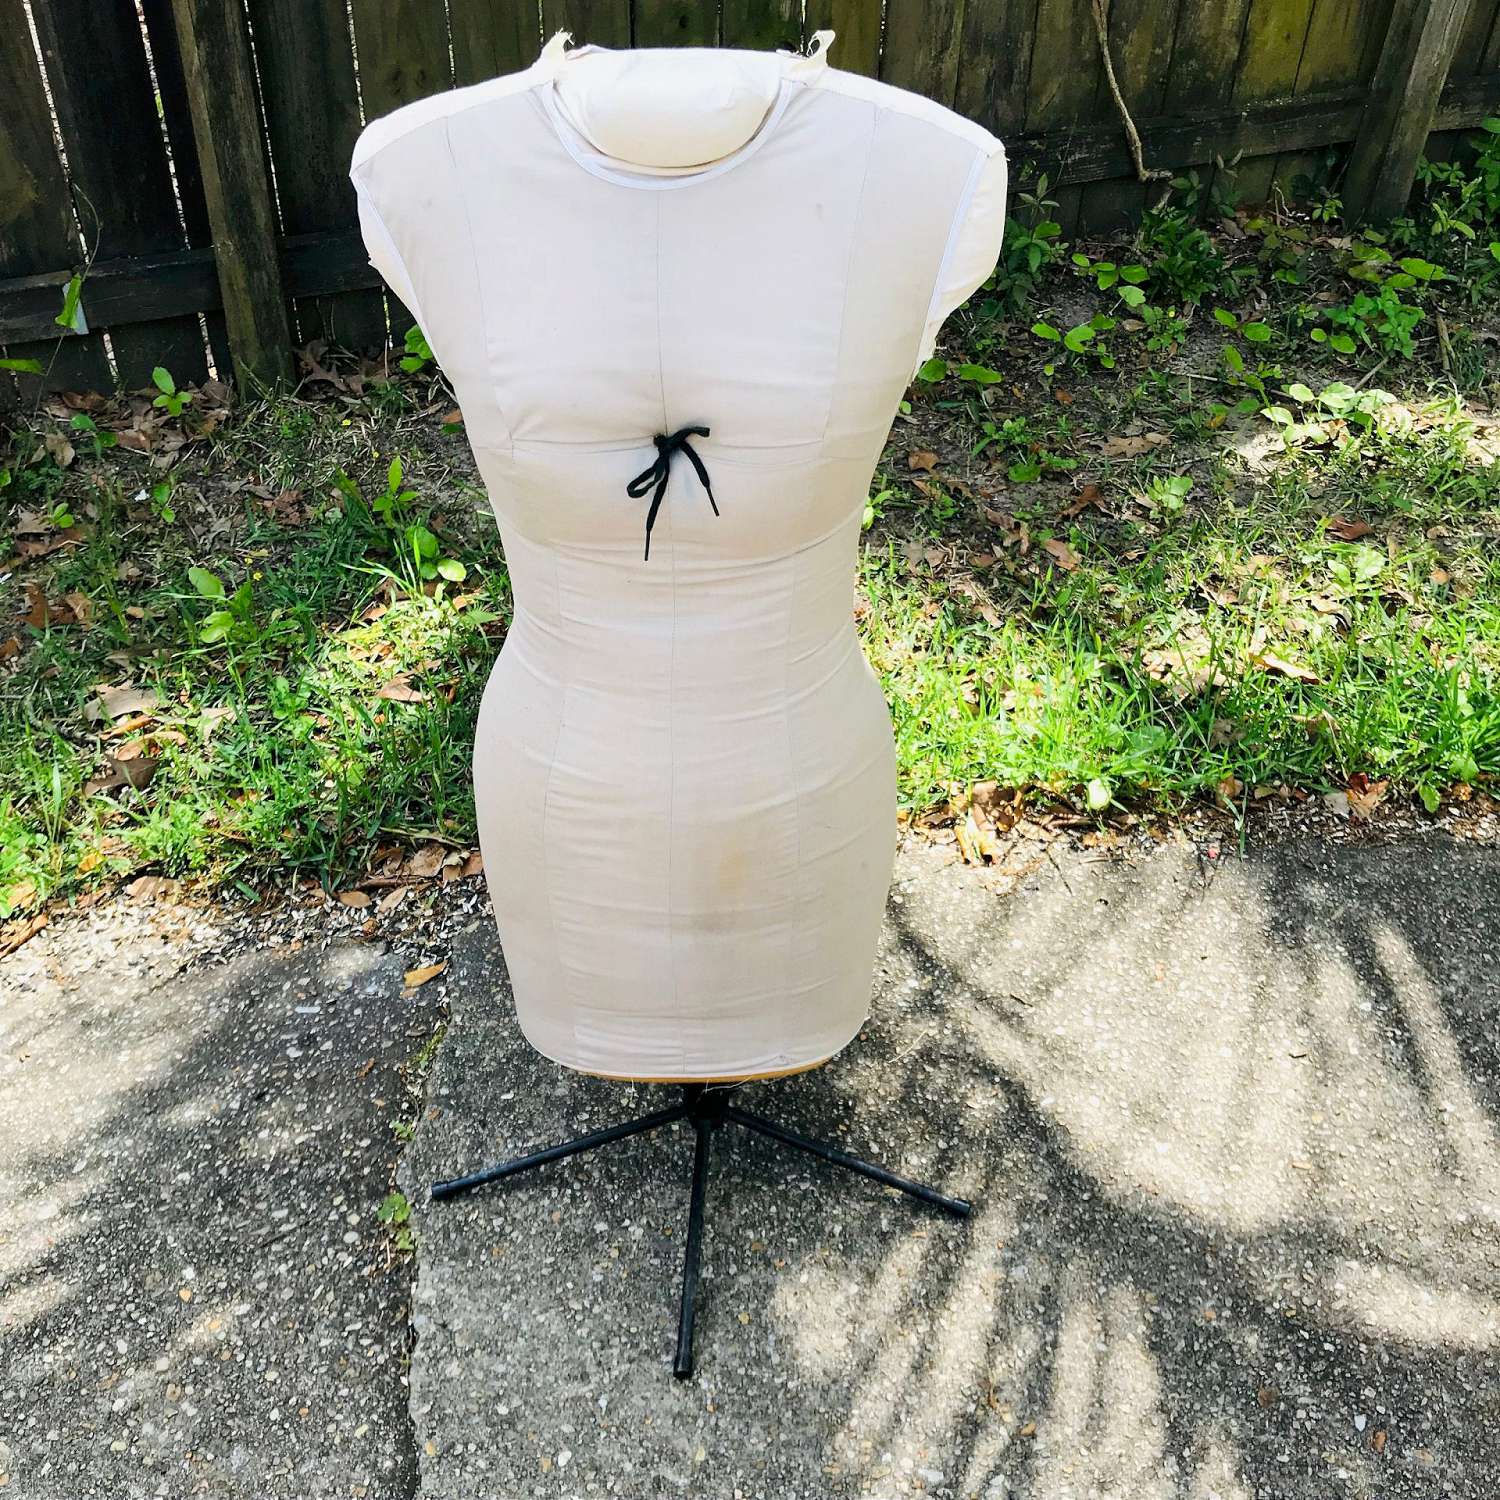 https://www.truevintageantiques.com/wp-content/uploads/2019/12/vintage-torso-display-dressmakers-body-mannequin-antique-foam-slip-covered-body-with-zipper-sewing-clothing-display-on-metal-stand-size-12-5dfaeae41-scaled.jpg